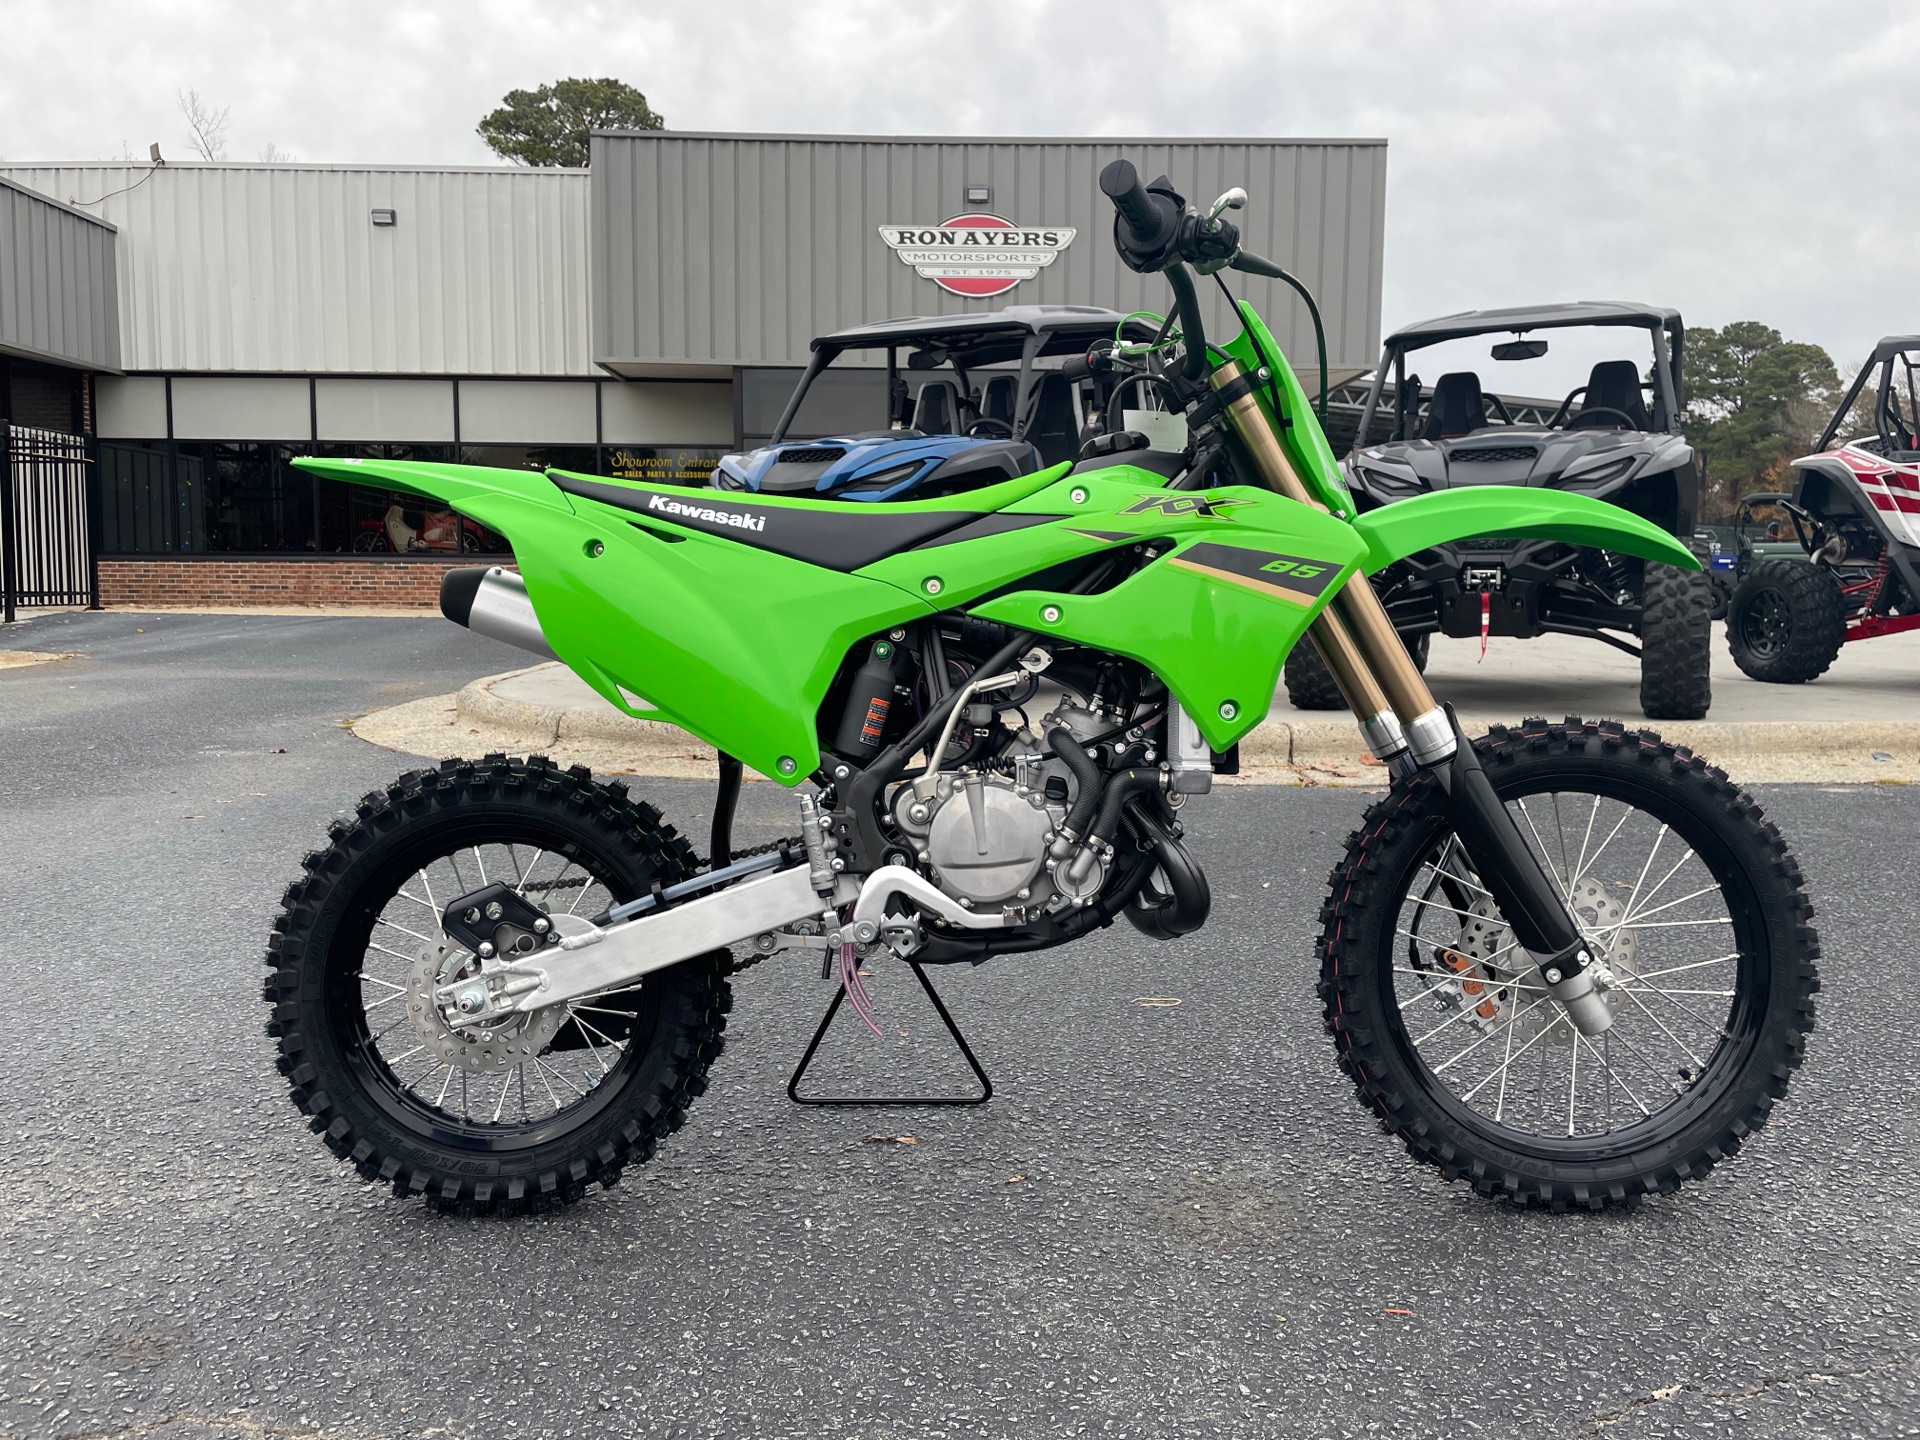 Seaport TVsæt Periodisk New 2022 Kawasaki KX 85 Motorcycles in Greenville, NC | Stock Number: N/A